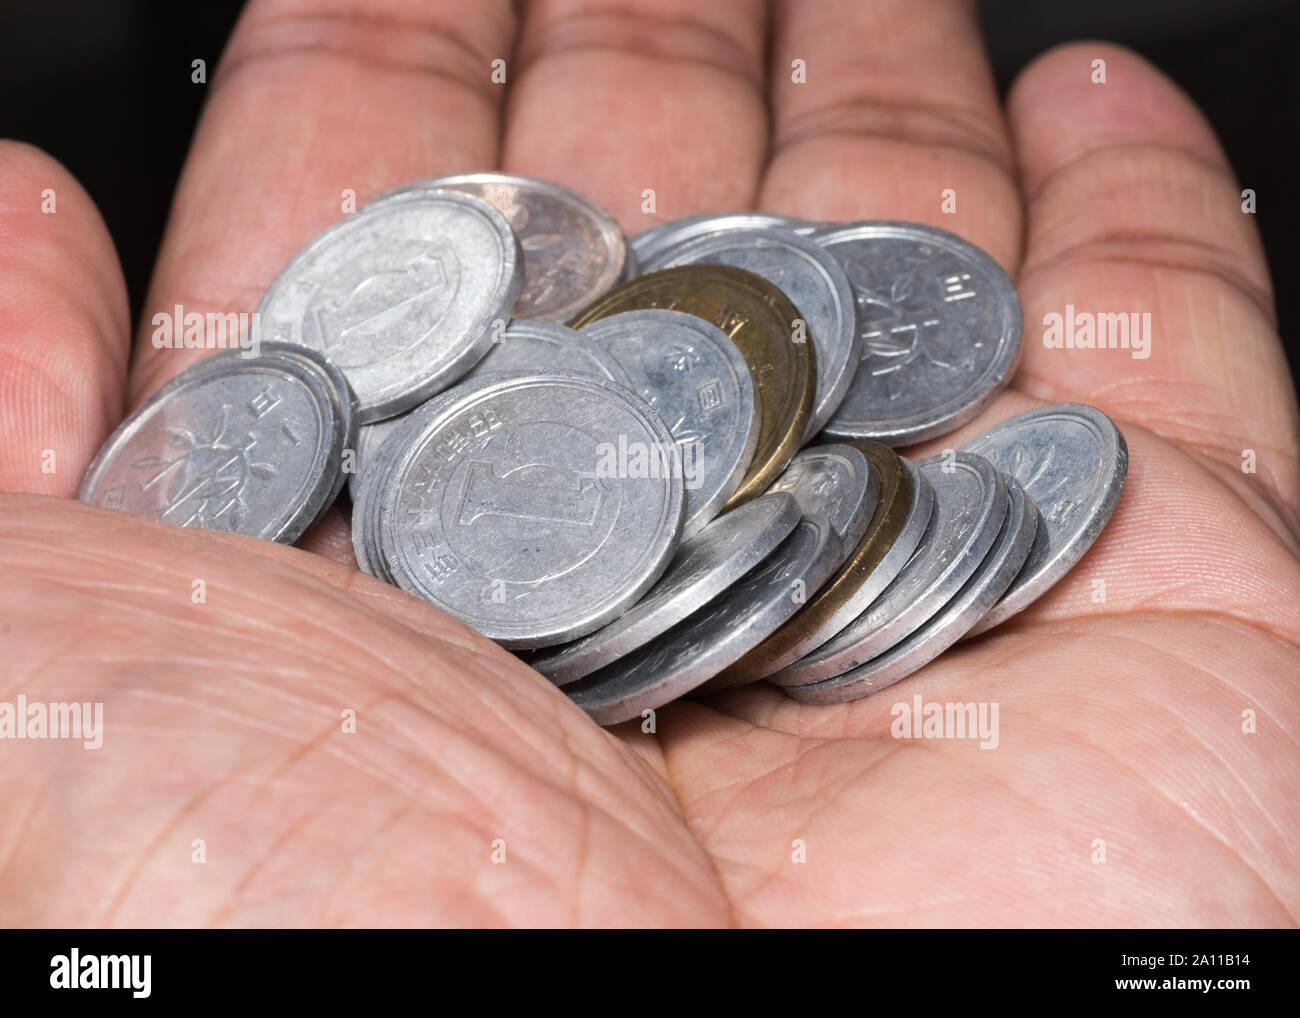 A hand holding a bunch of Japanese smaller amount coins. Stock Photo